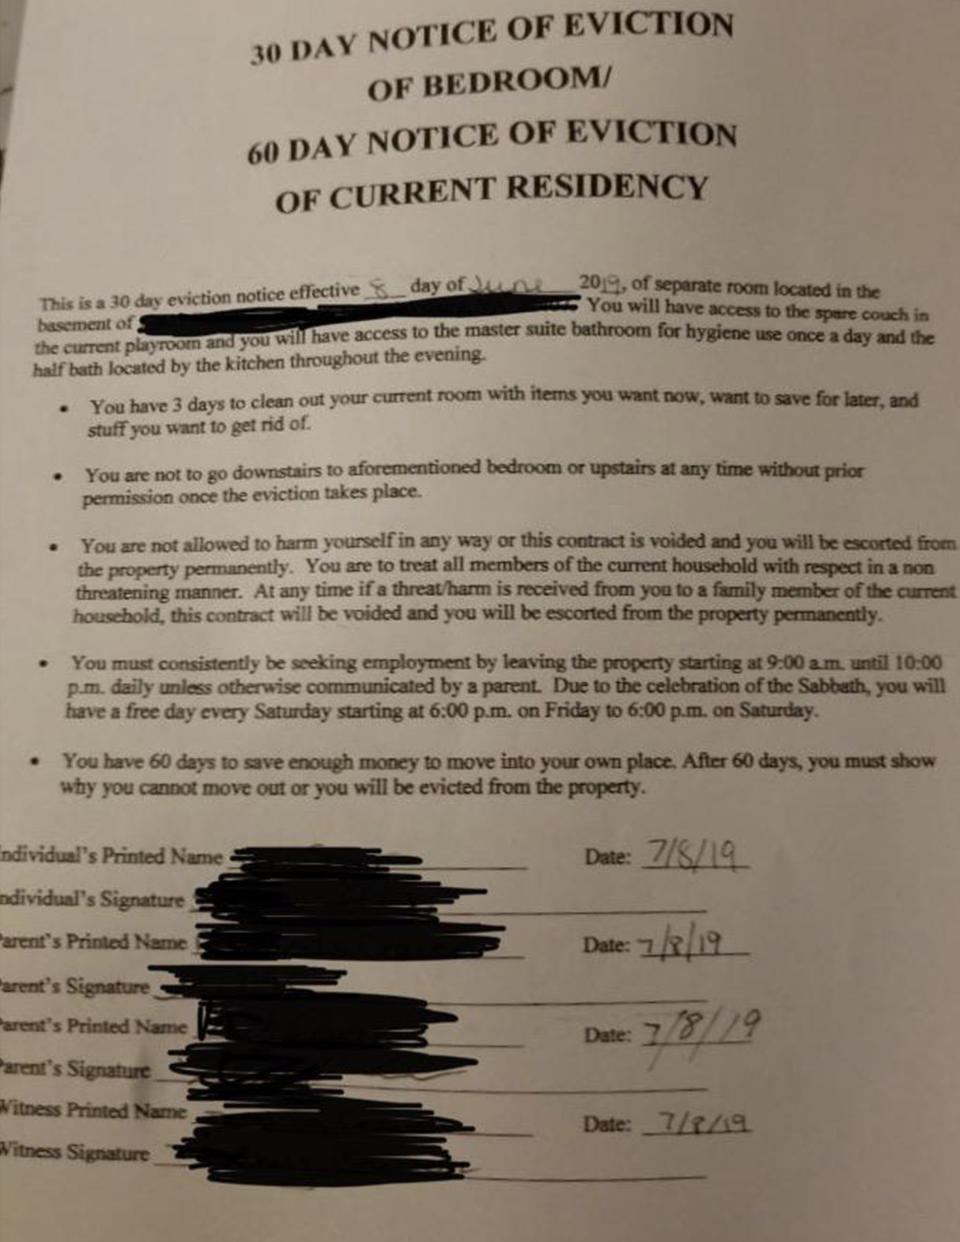 The eviction notice that was posted on Reddit giving the 18-year-old boy 60 days to move out.